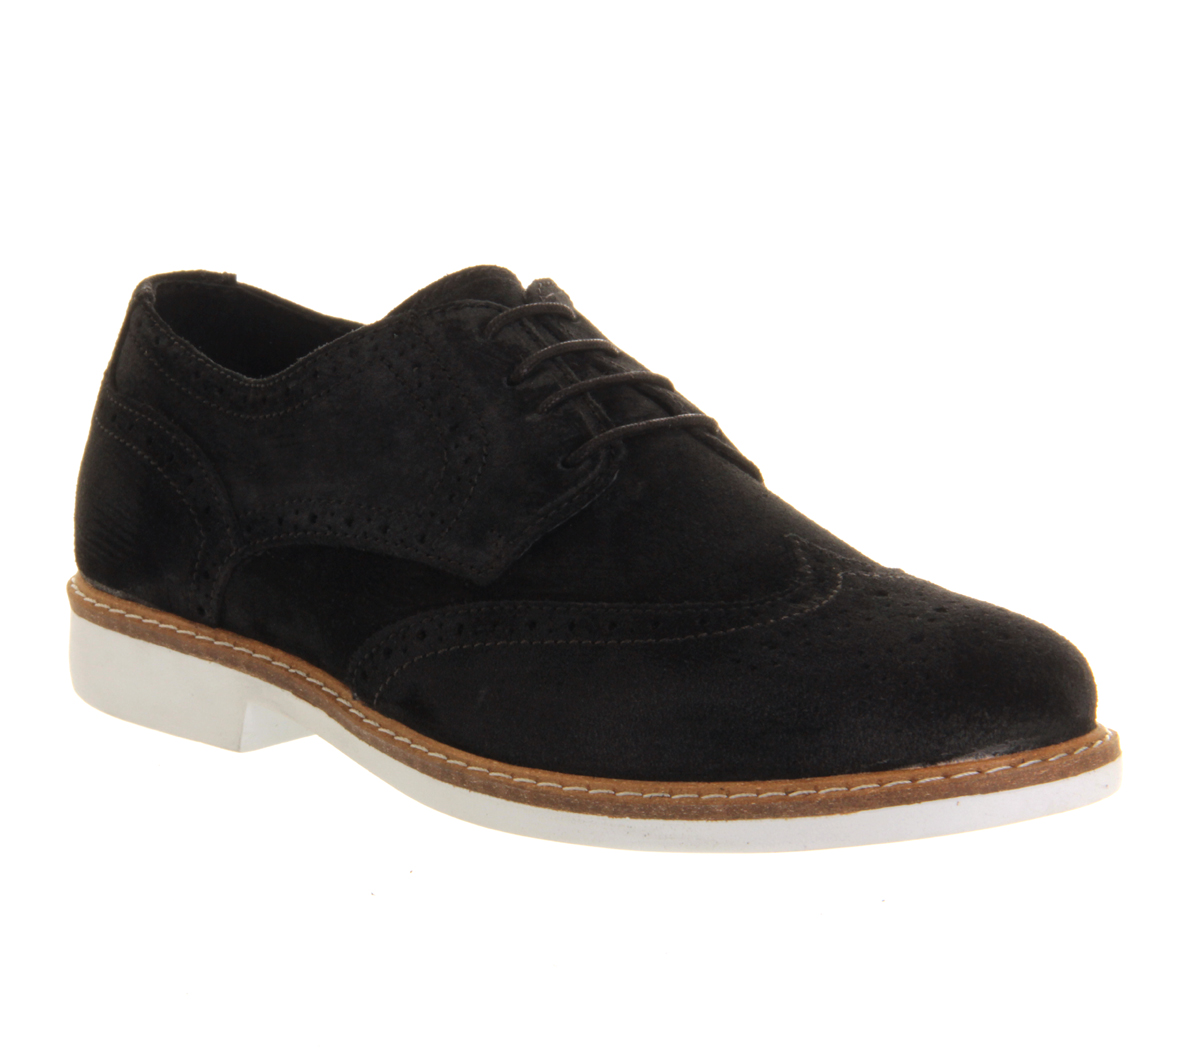 black brogues with white sole